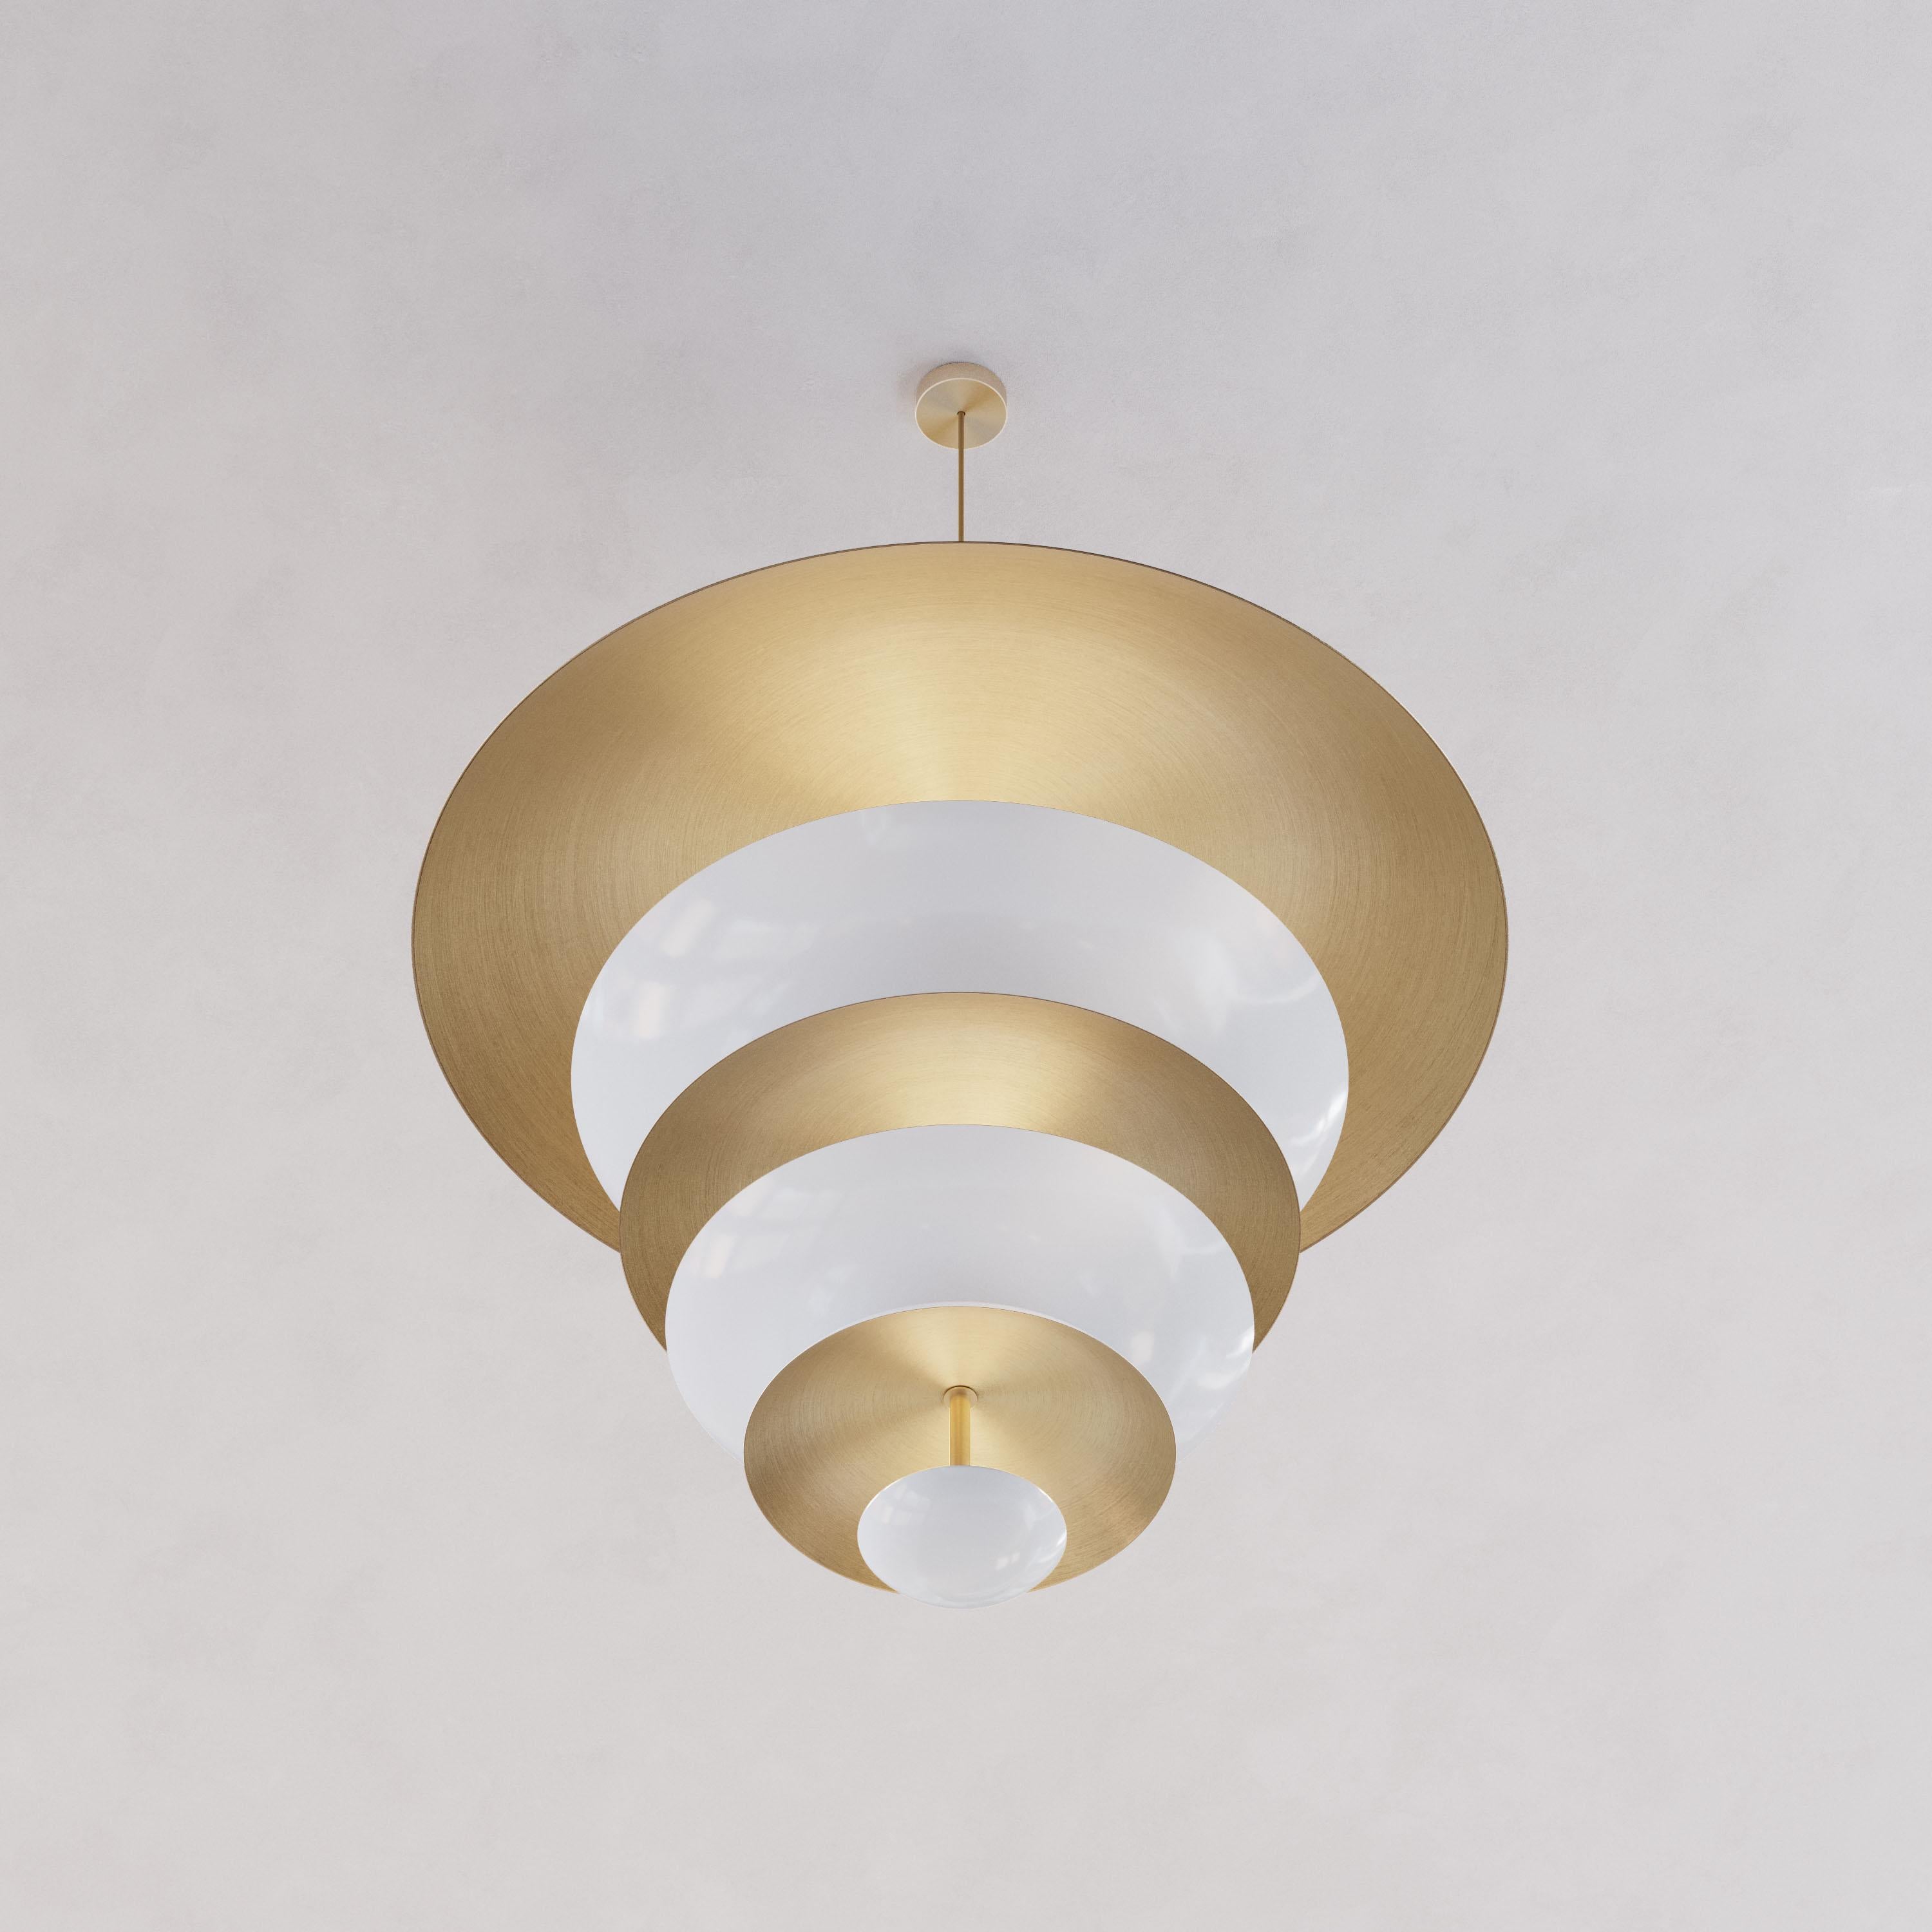 English 'Cosmic Purion' Chandelier XL 70' White Lacquered Brass Chandelier, Ceiling Lamp For Sale